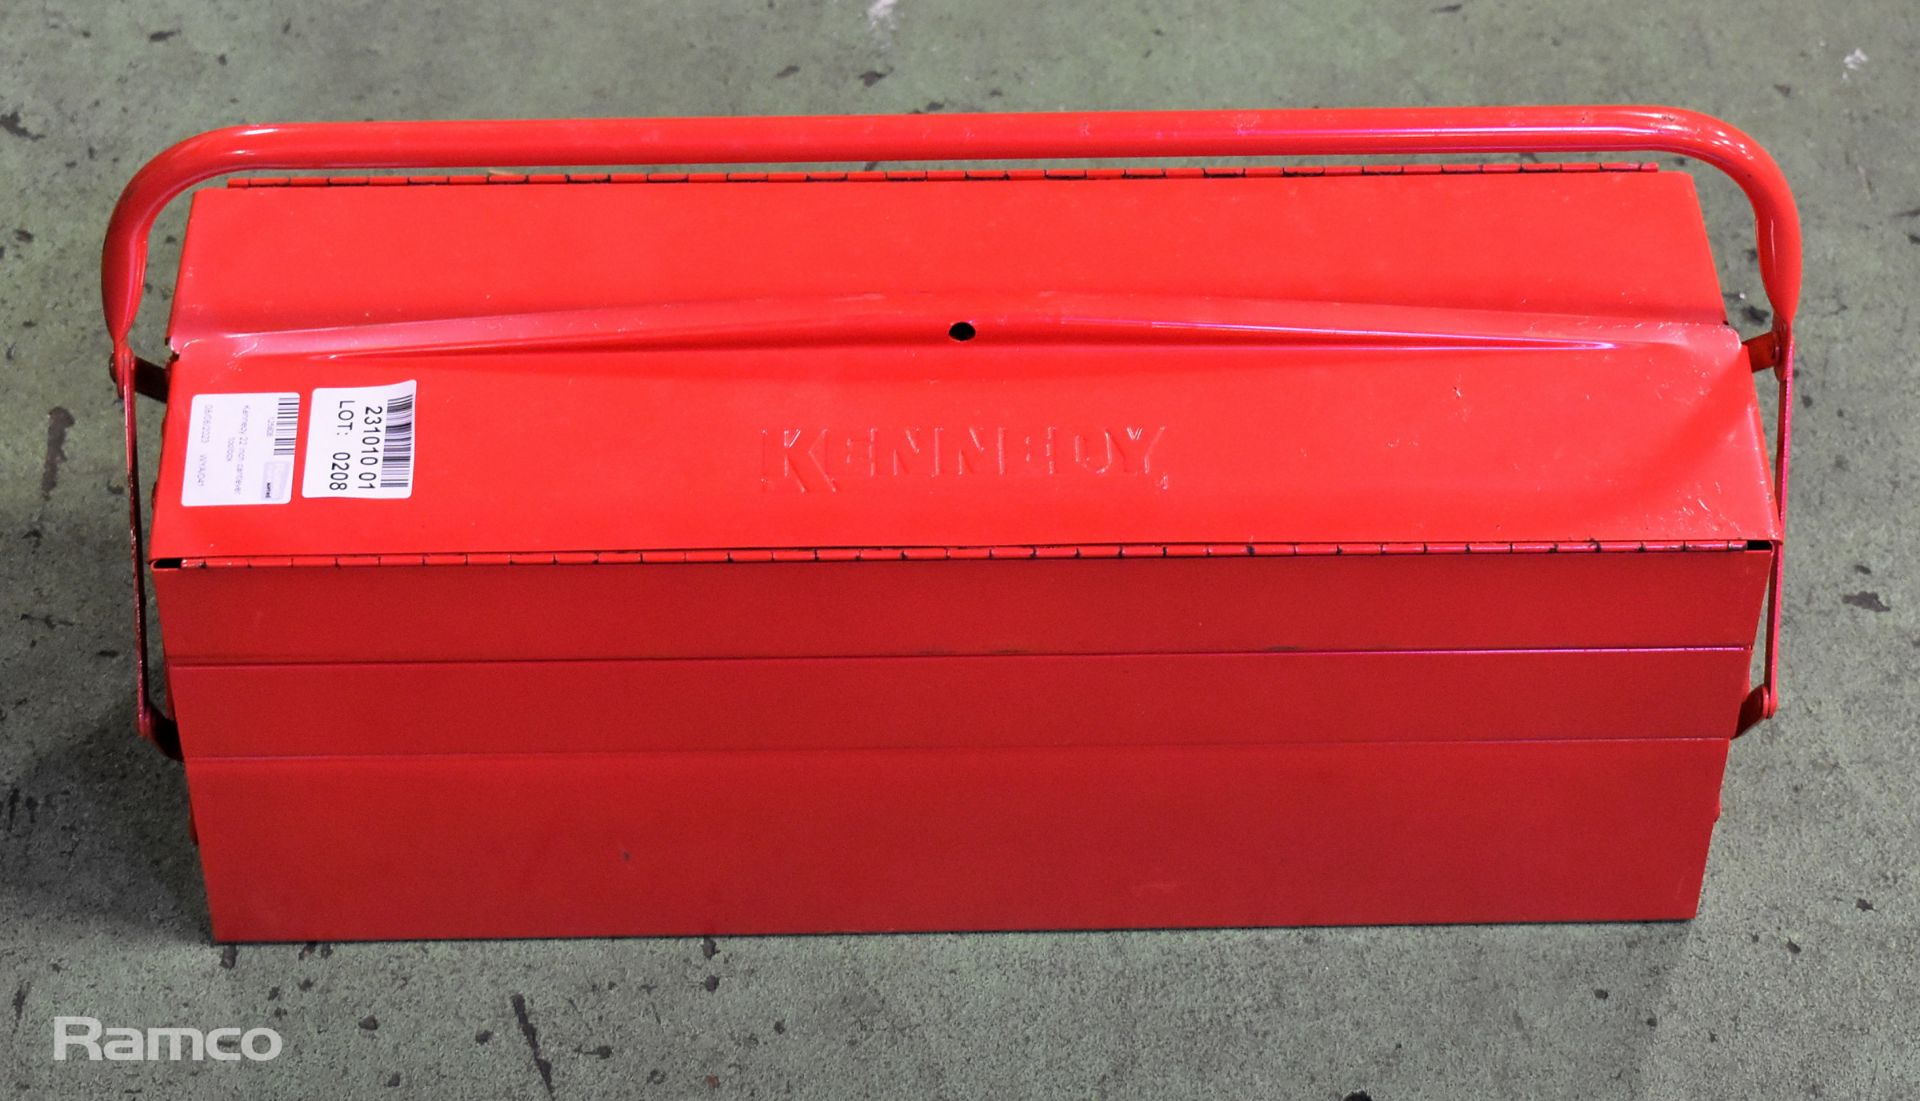 Kennedy 22 inch cantilever tool box - Image 4 of 4